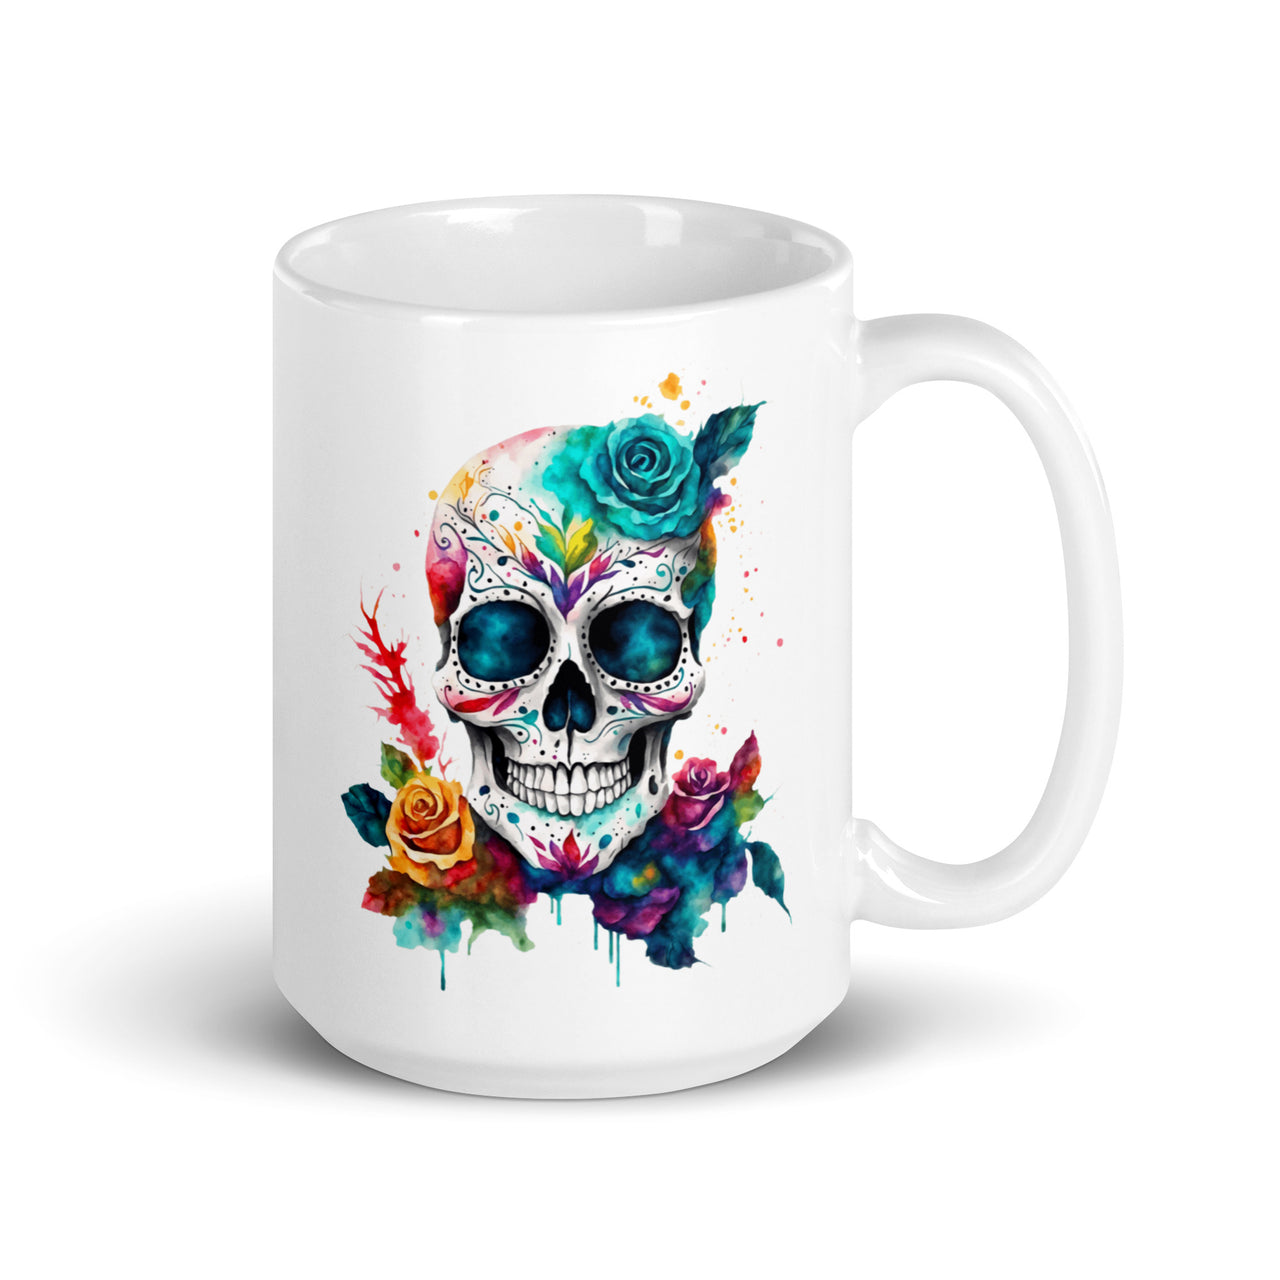 Sugar Skull Day Of The Dead Floral Novelty Gothic Gift Coffee Cup Mug -White